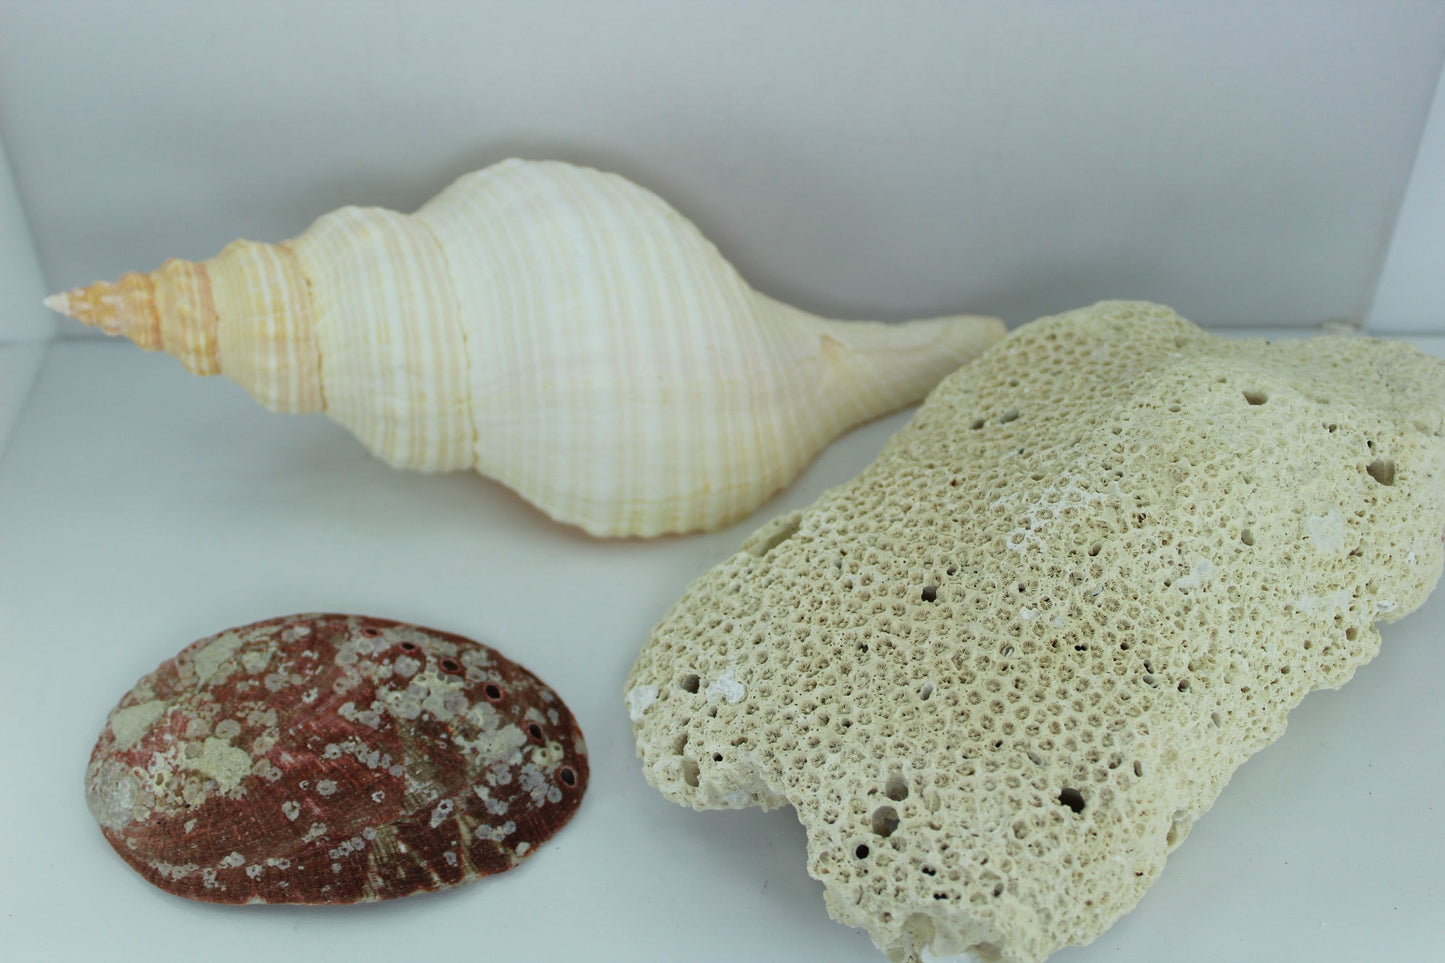 Florida Natural Shells Coral Horse Conch Red Abalone Vintage Estate Collection Shell Art  mother pearl